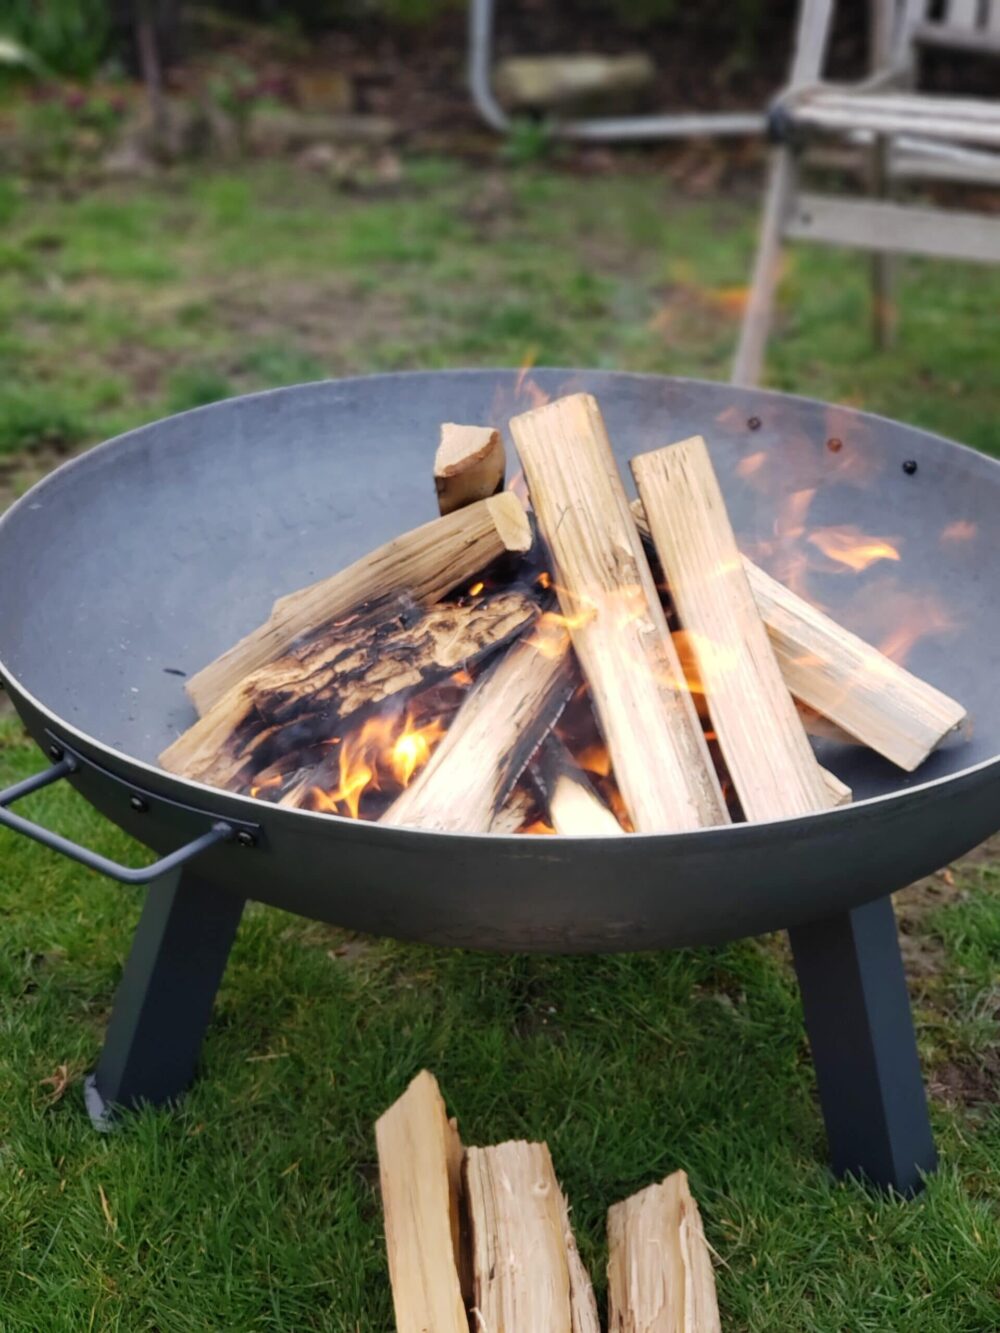 Fire Pit On Grass: 5 BEST Ways To Prevent Damage To Your Lawn